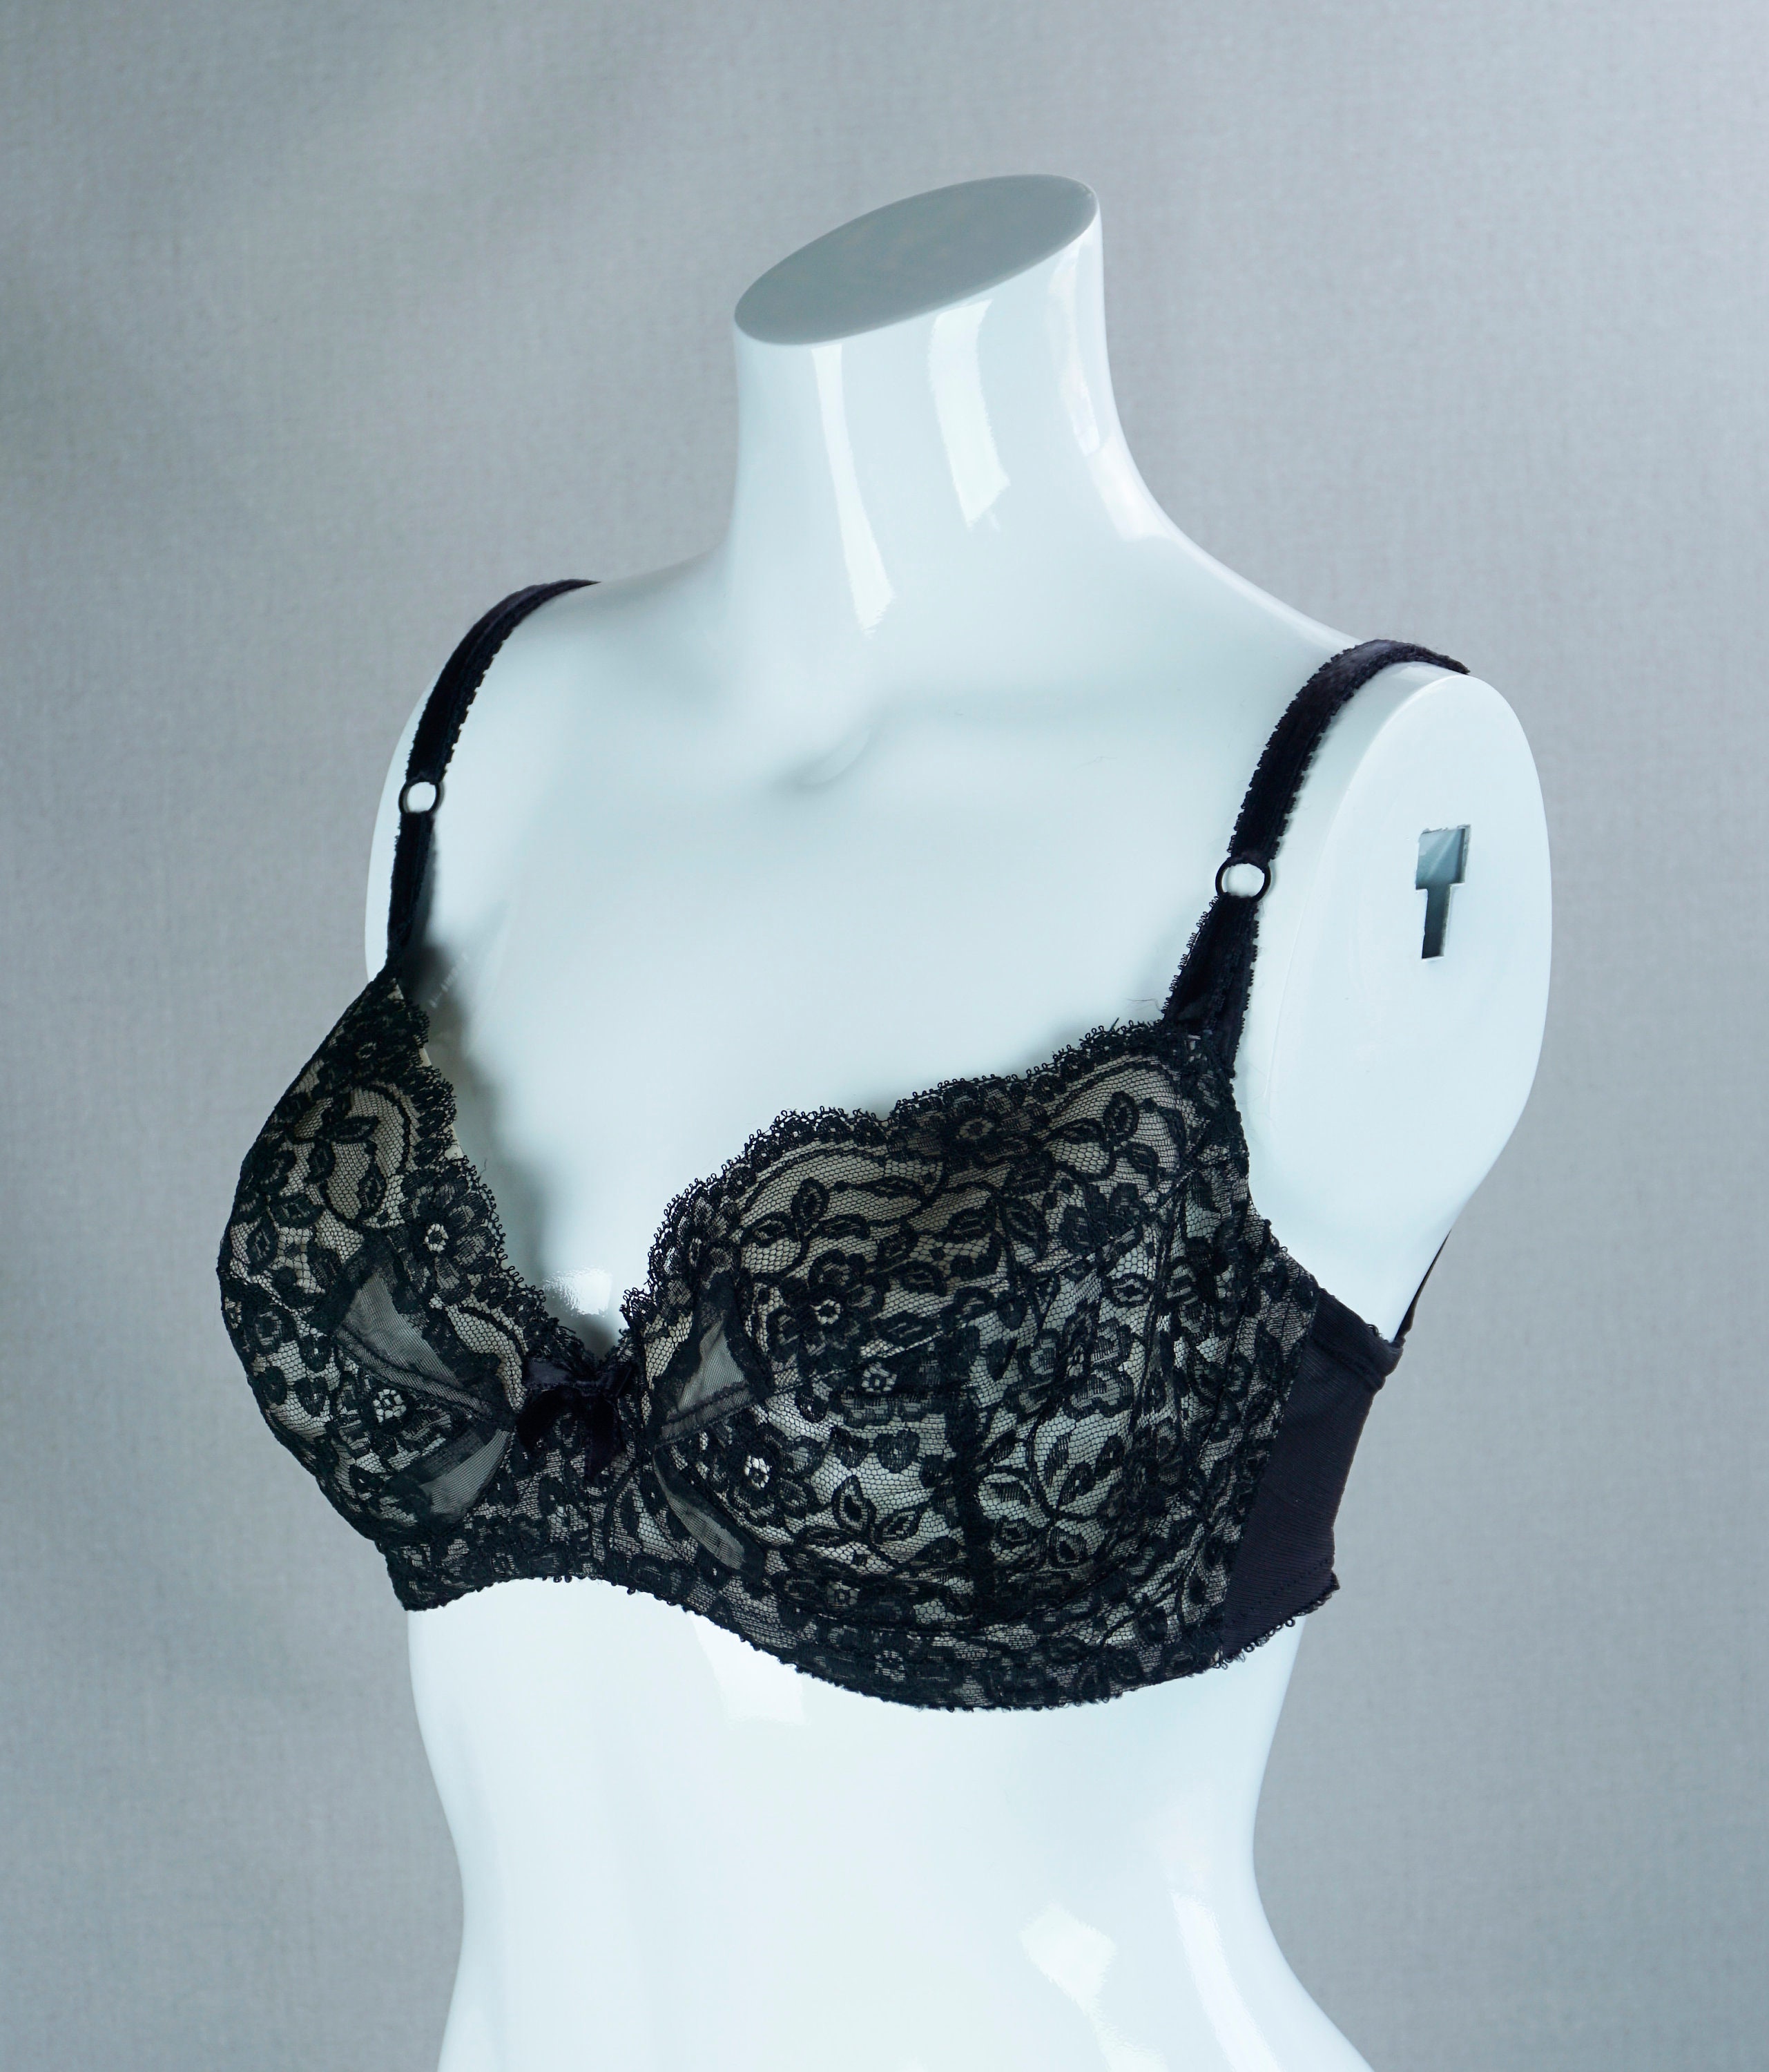 Vintage New Bali Double Support Full Support Soft Cup Bra Tuxedo Black 40B  -  New Zealand